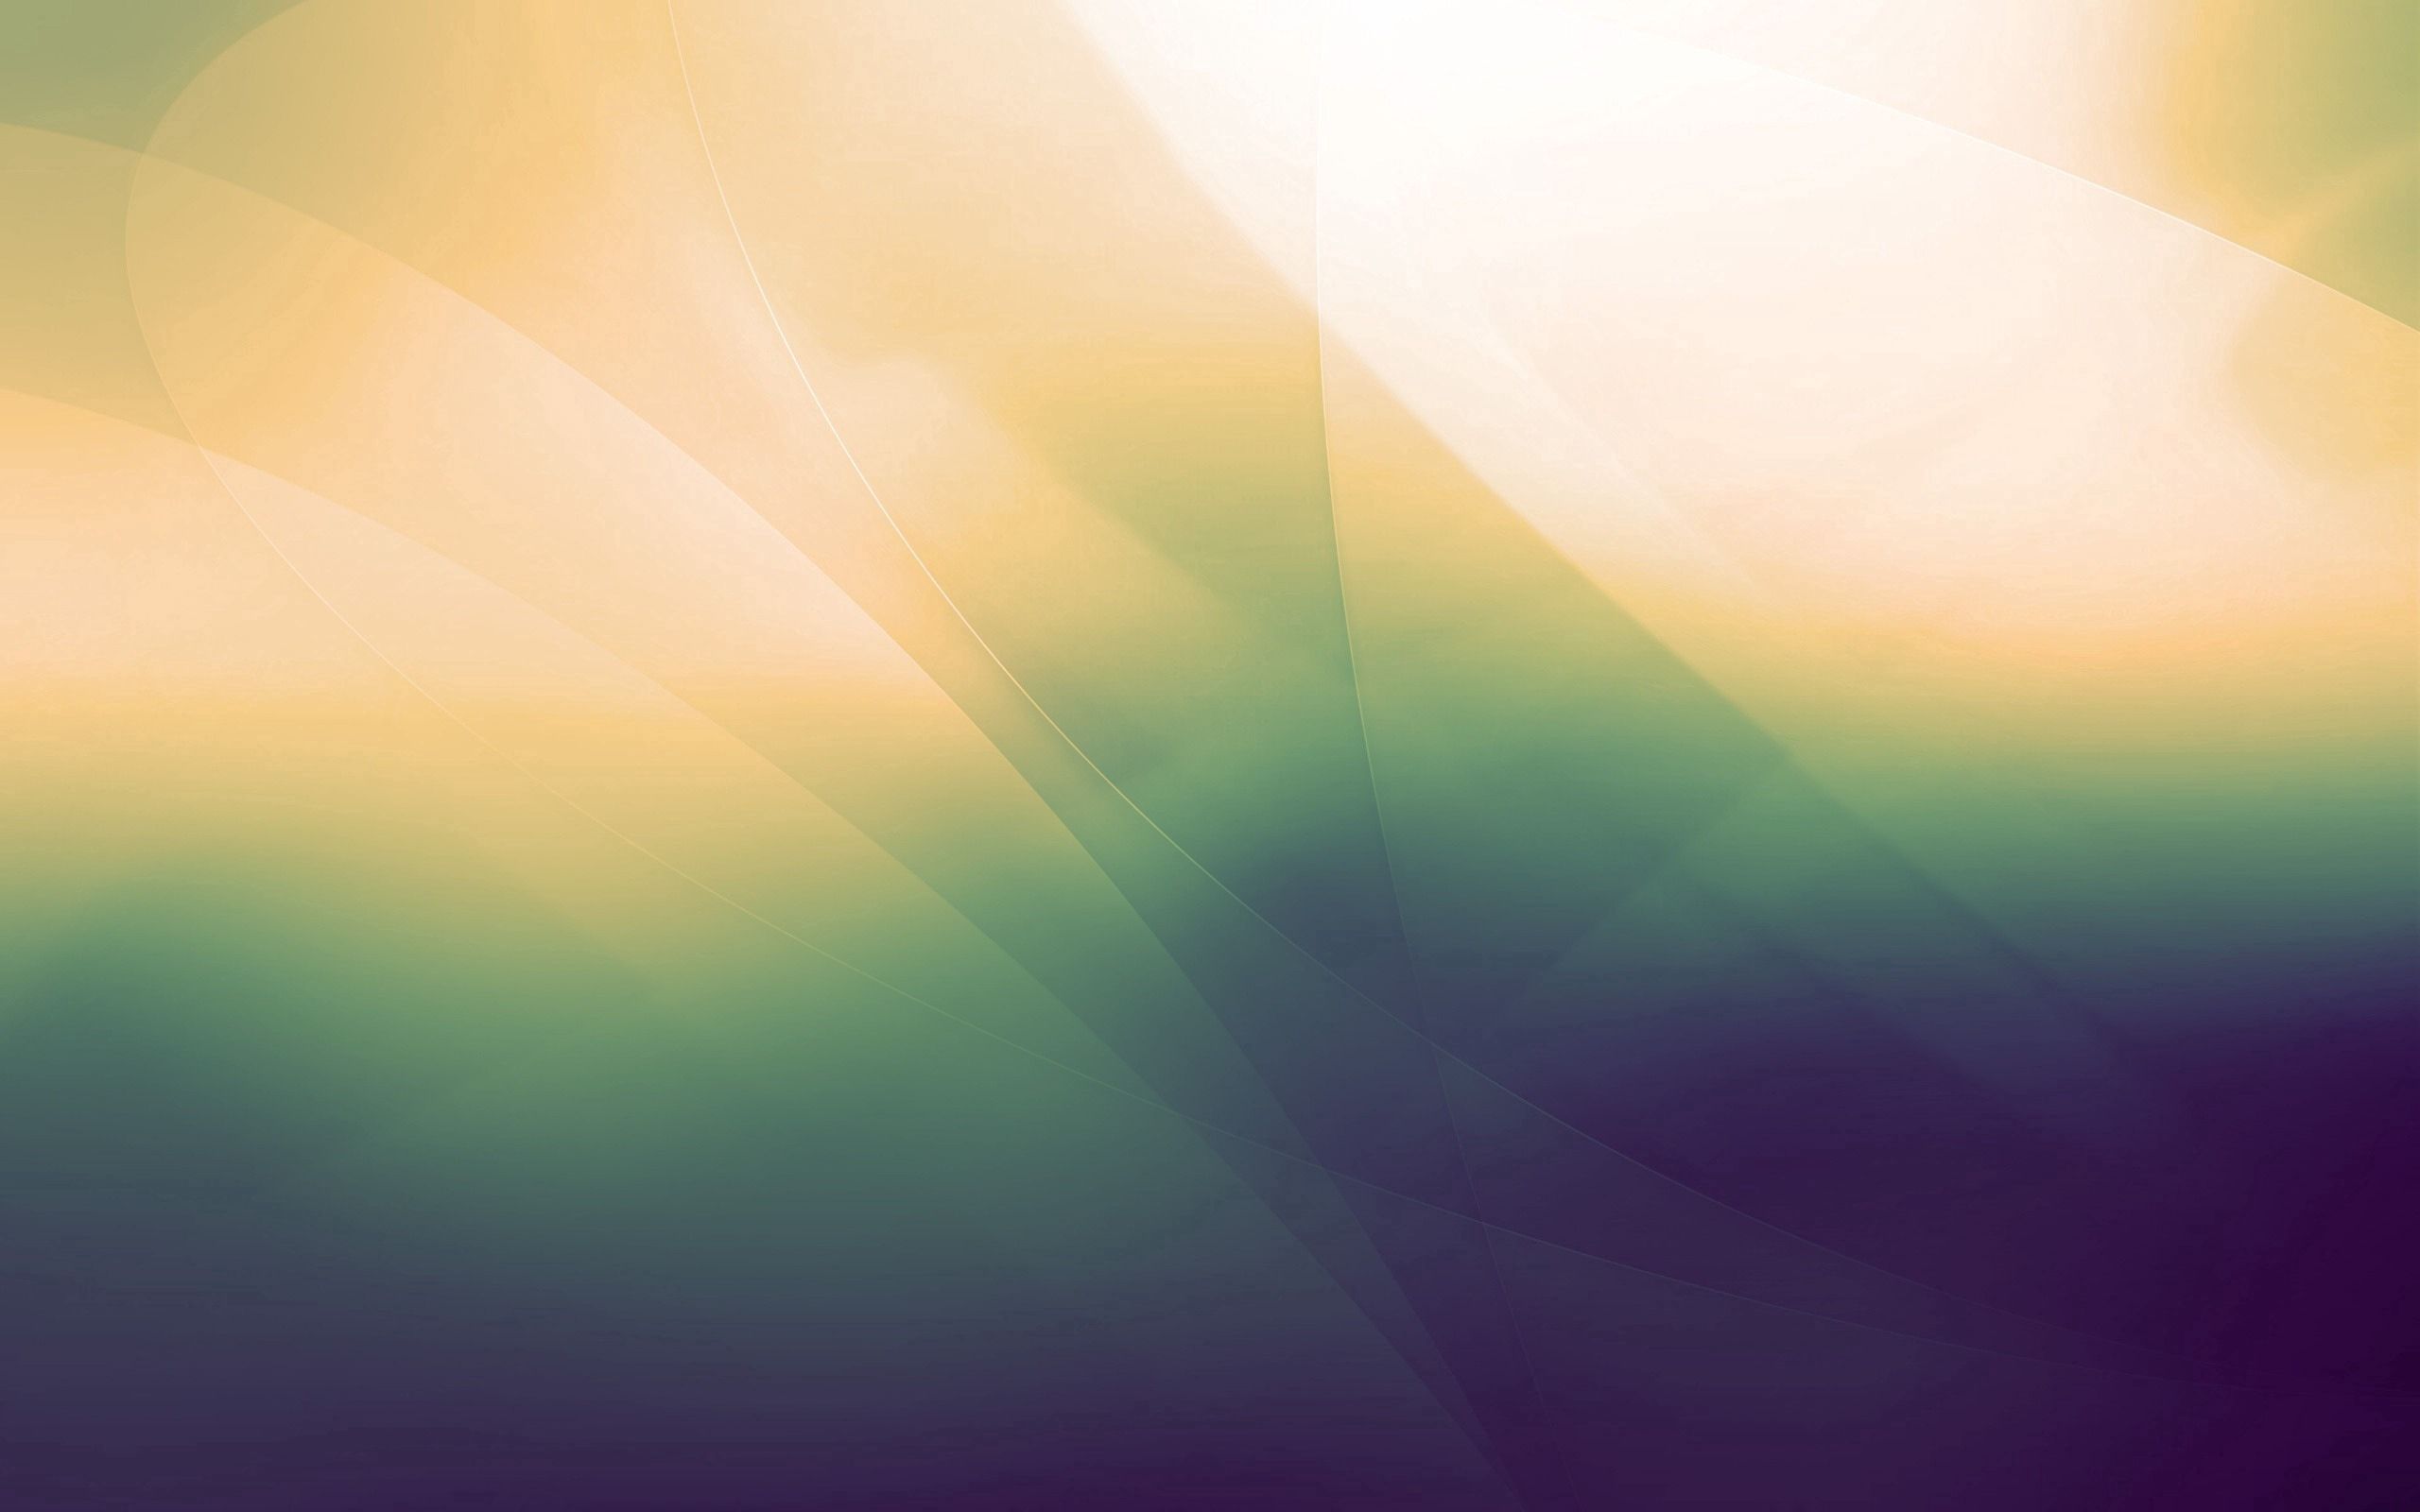 faded, abstract, shine, light, blur, smooth, paints Full HD